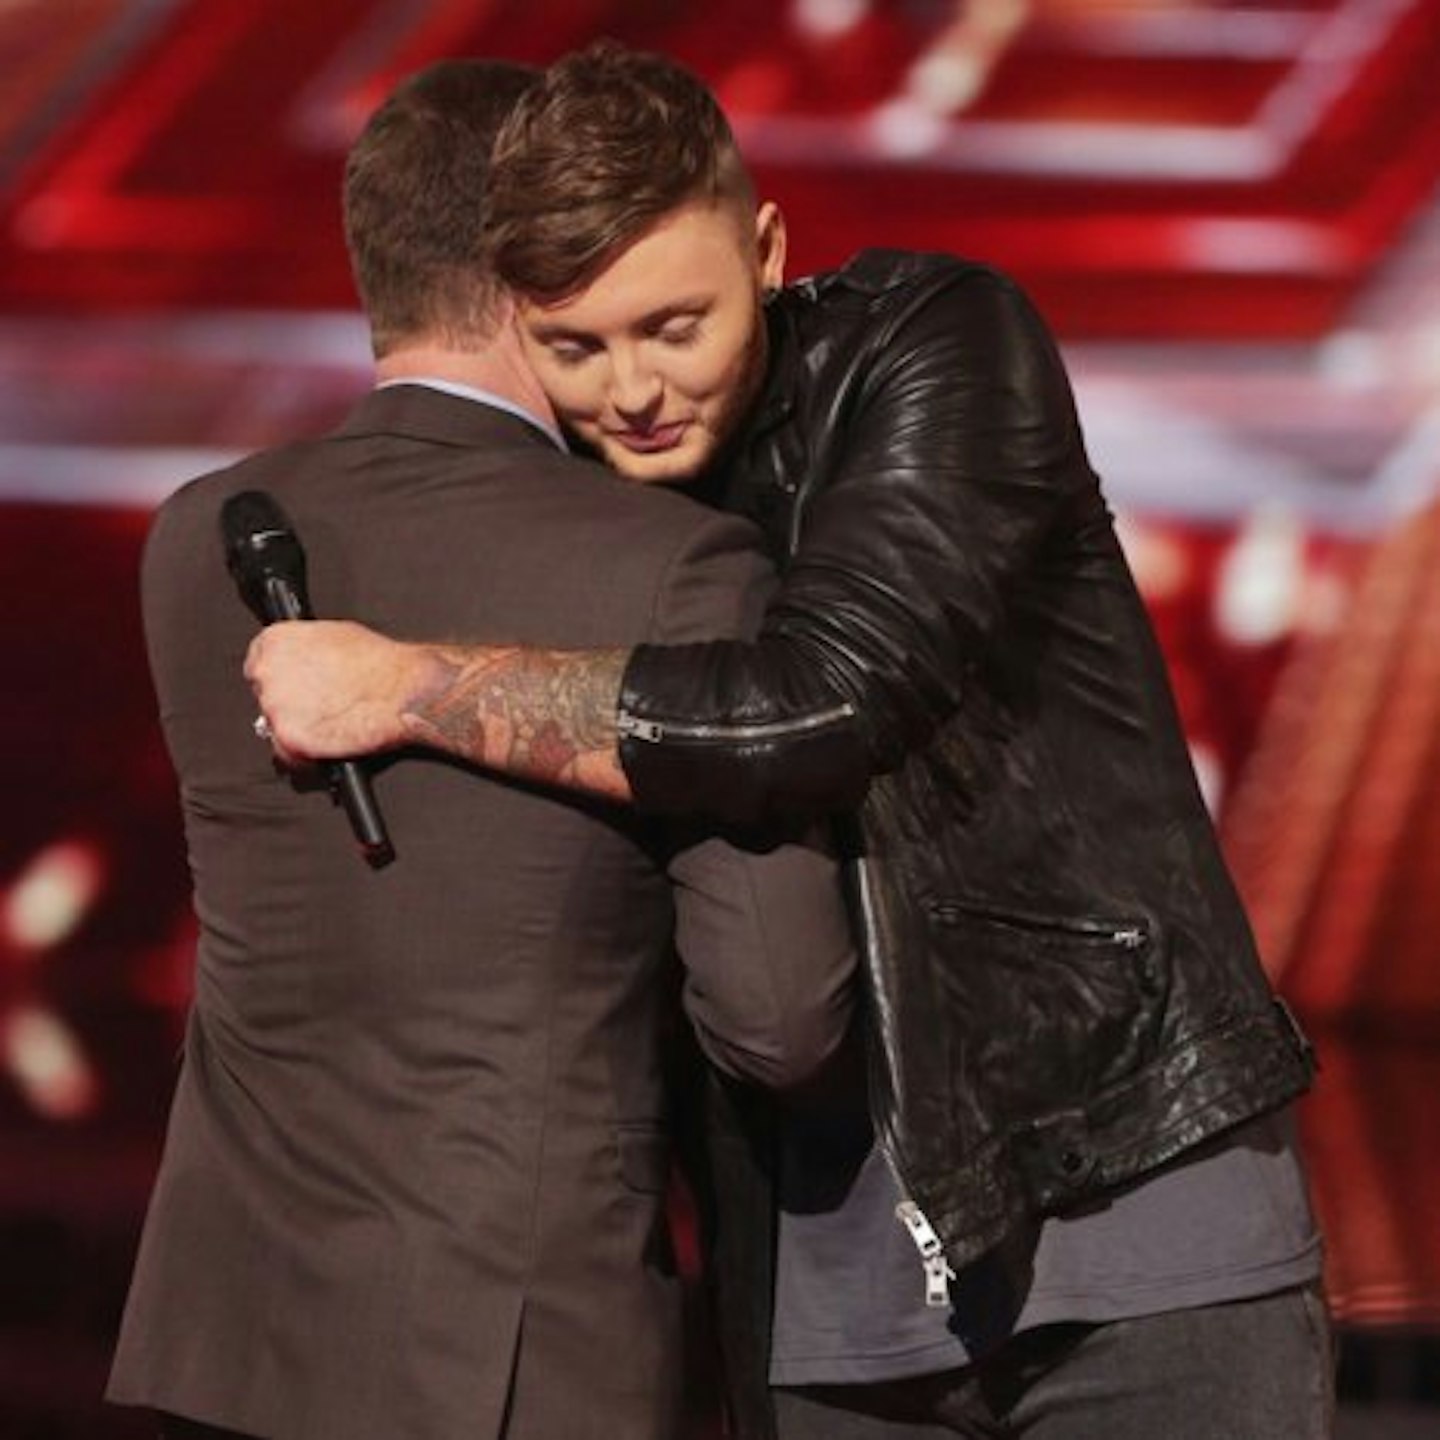 James Arthur was hugged by Dermot O'Leary after apologising for his behaviour on Sunday's episode of The X Factor